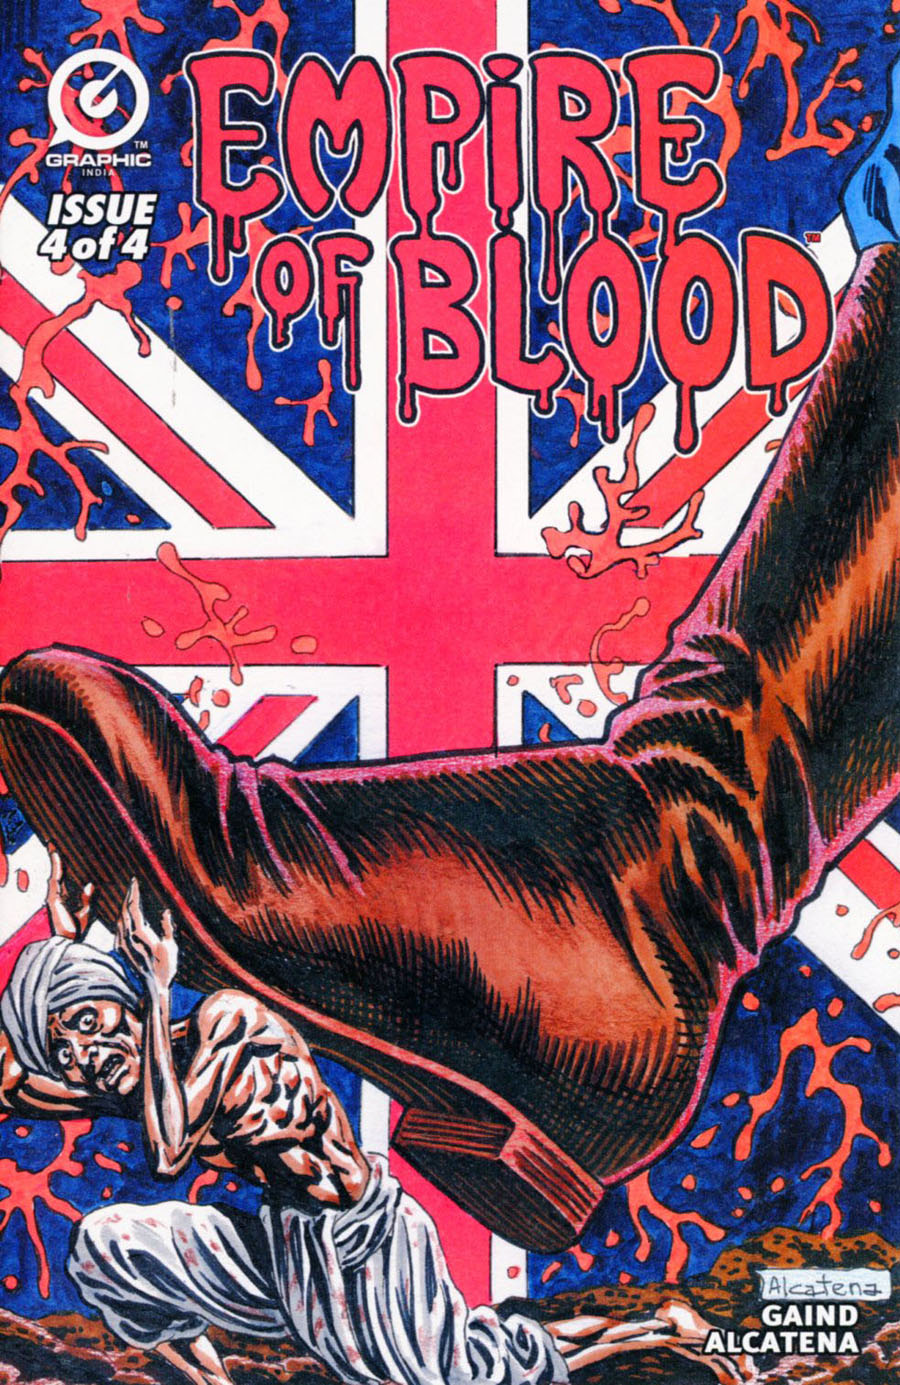 Empire Of Blood #4